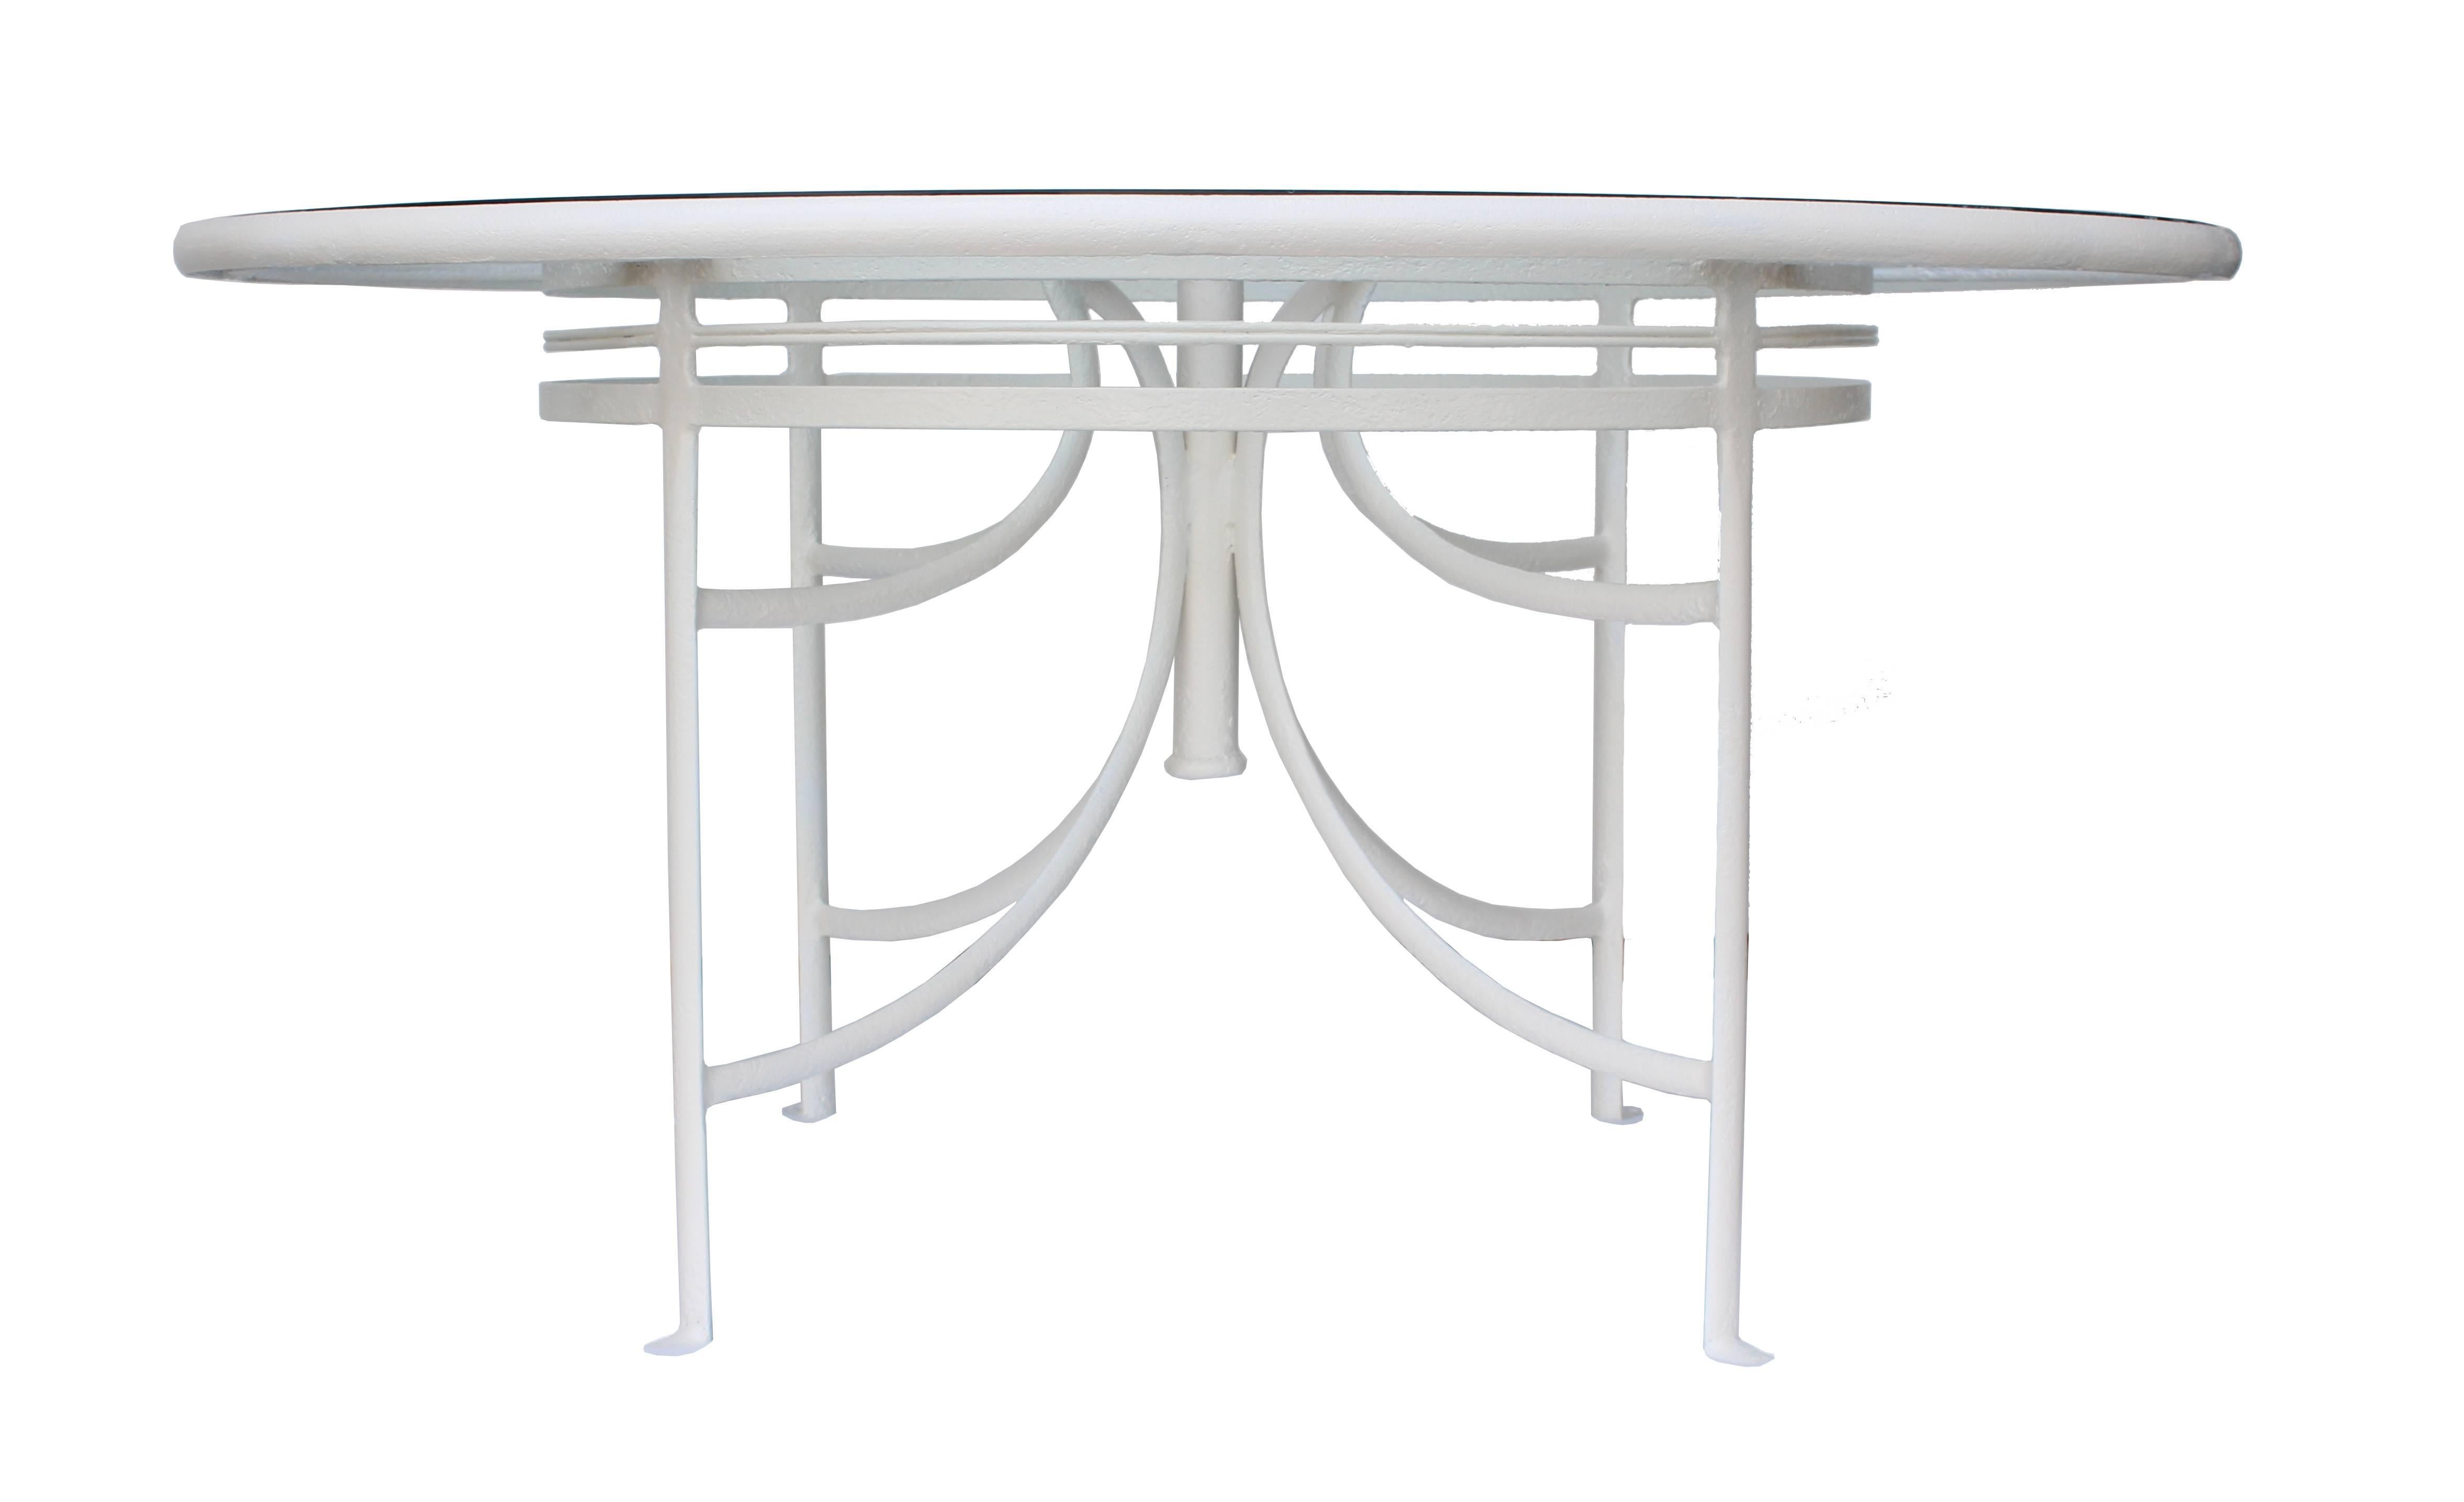 Art Nouveau 1930s White French Iron and Glass Outdoor Garden Dining Table Round